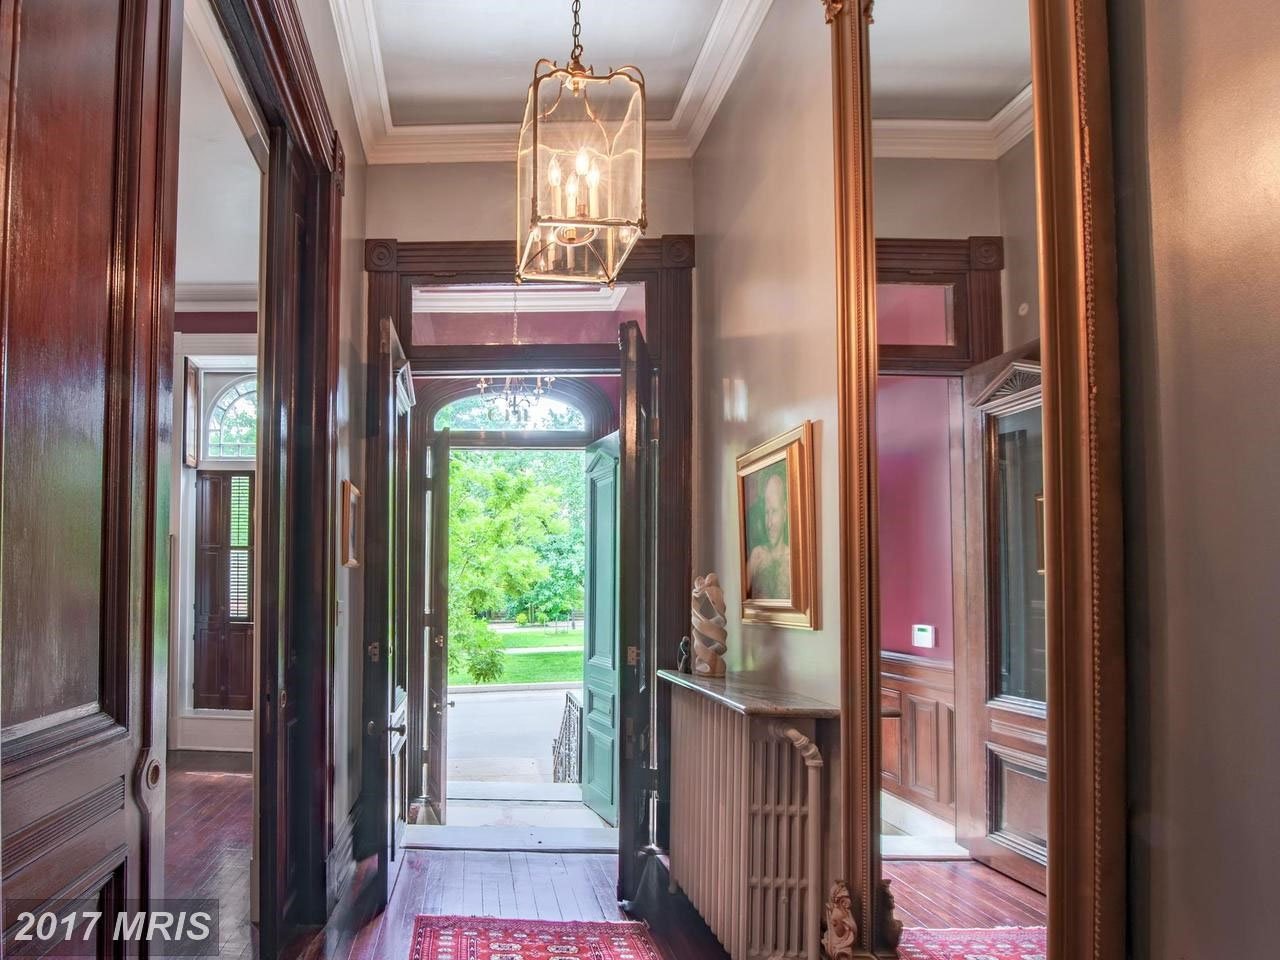 A late 19th-century Victorian brick row house in Baltimore whose exterior was seen in the TV series "House of Cards" as the abode of power-hungry D.C. power couple Frank and Claire Underwood is going up for auction.